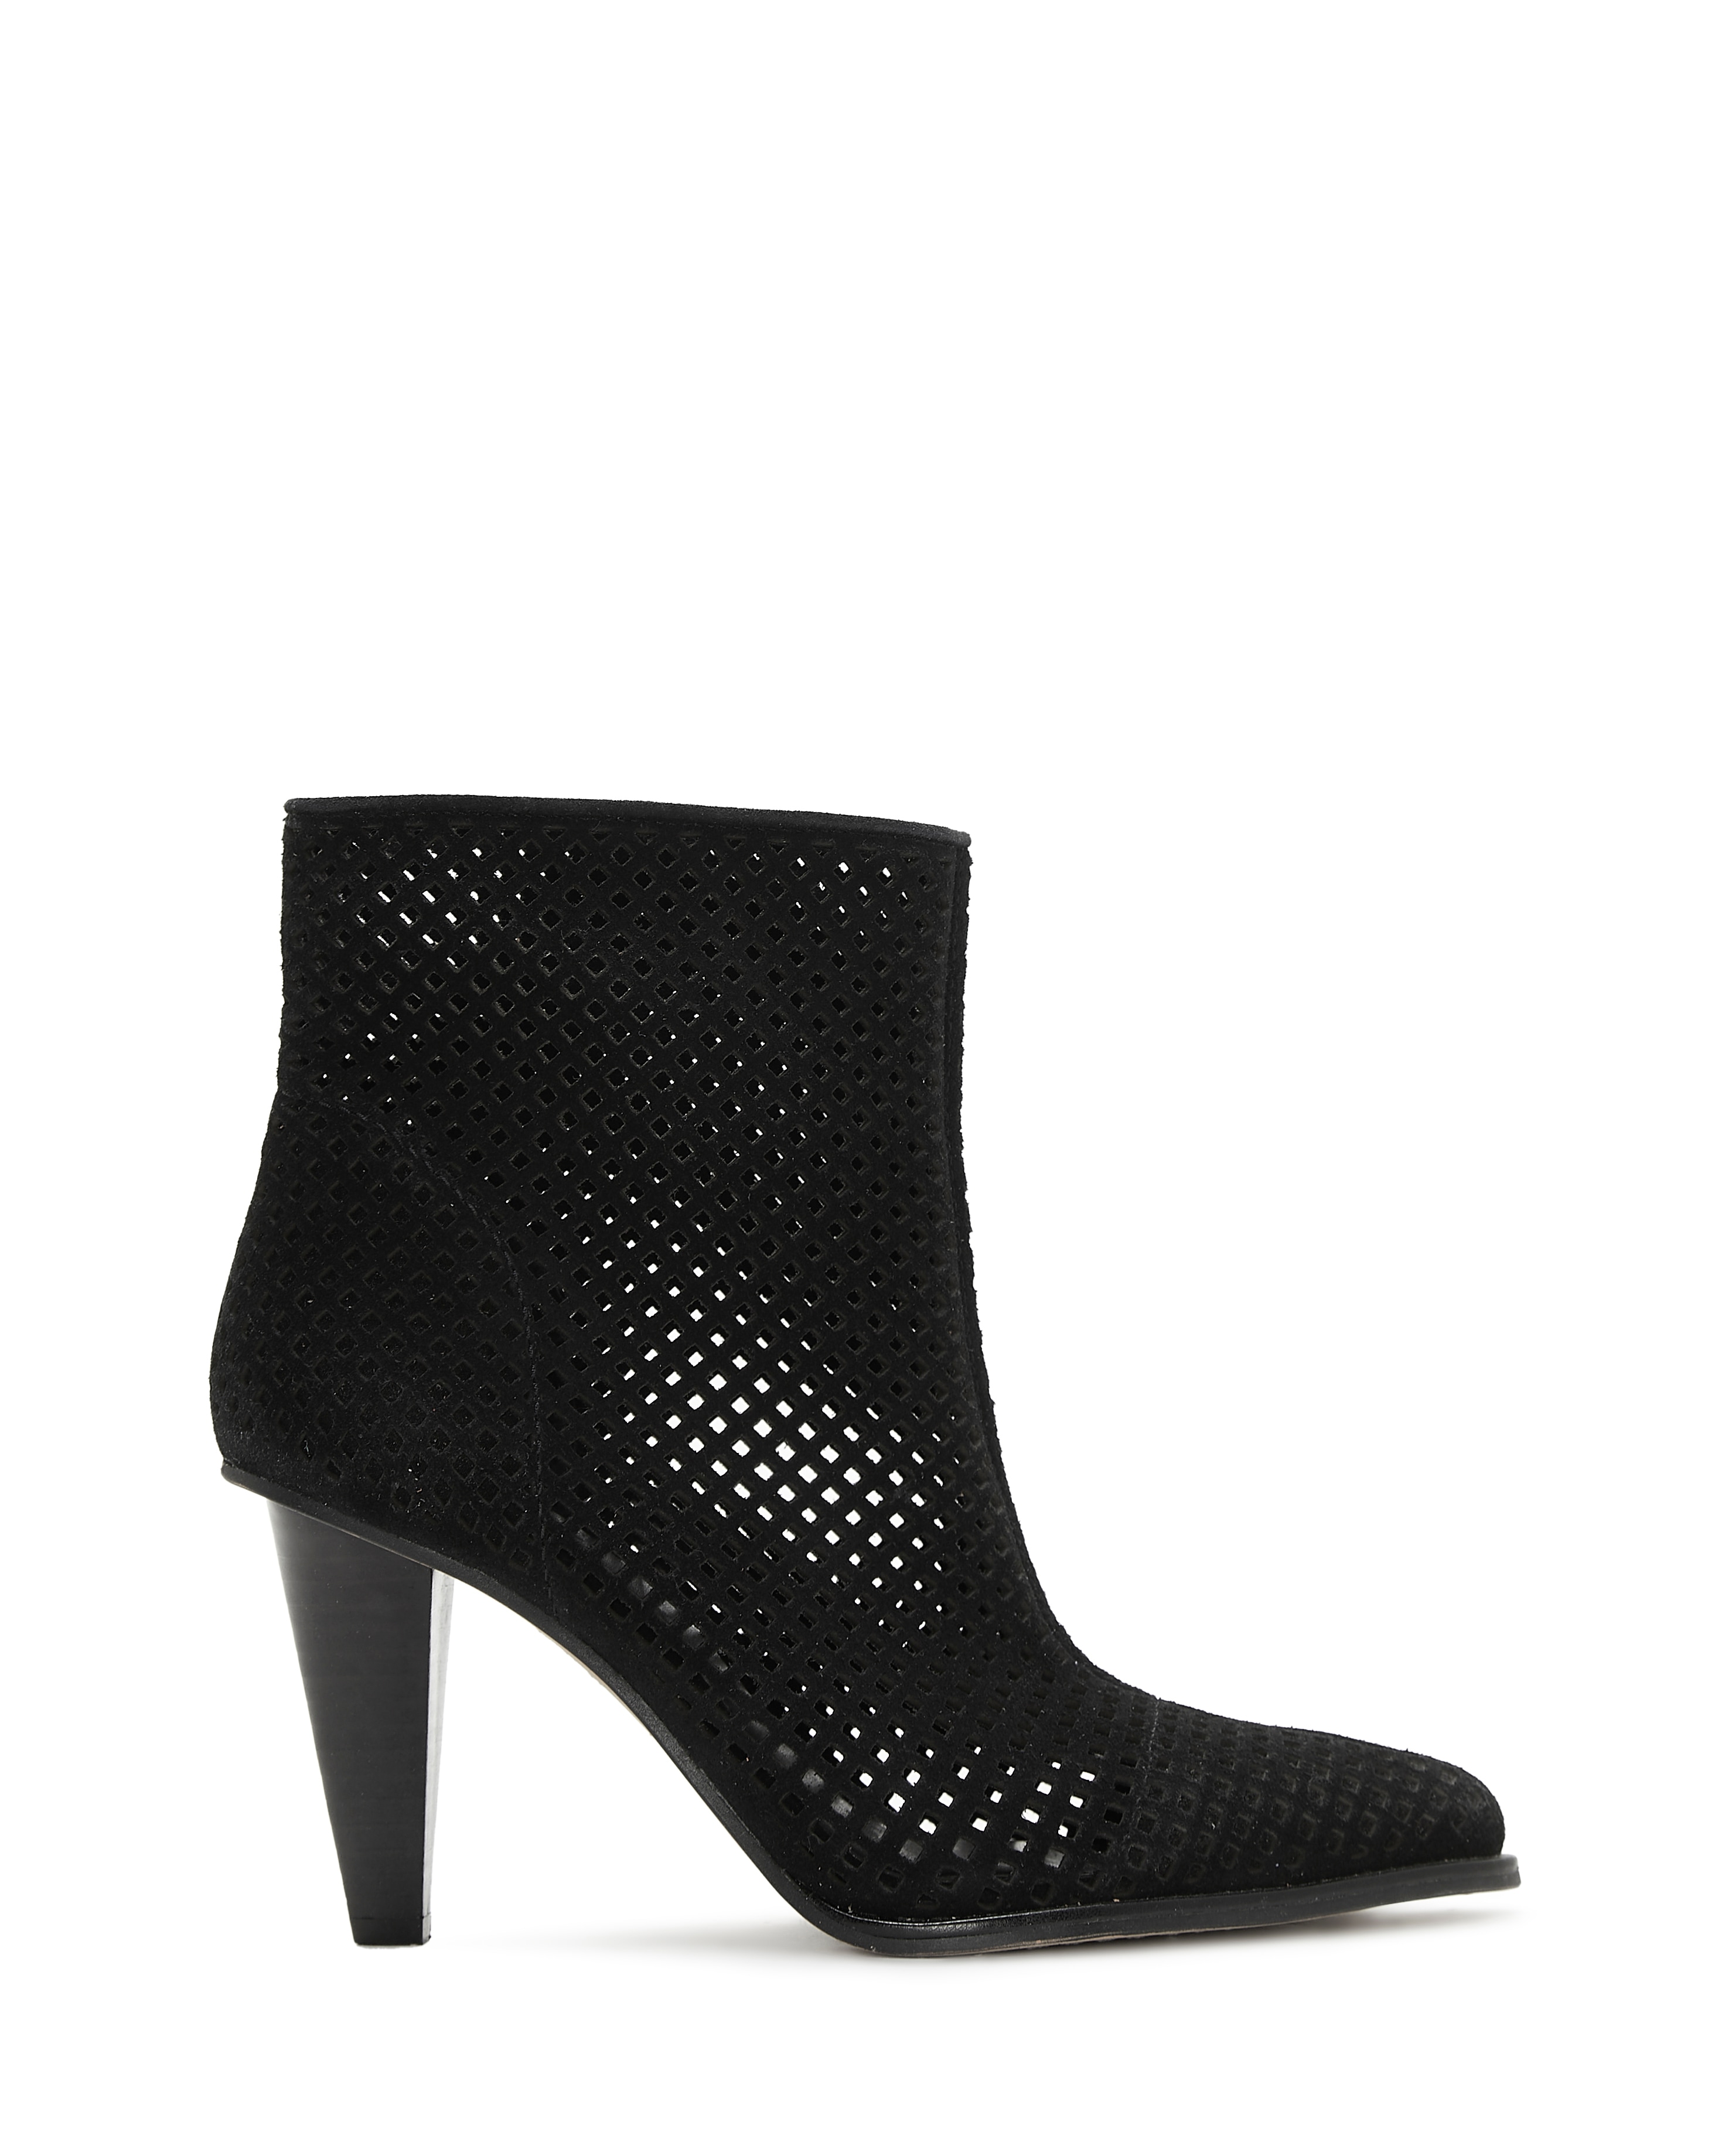 Vince Camuto Yolandal Bootie | Vince Camuto